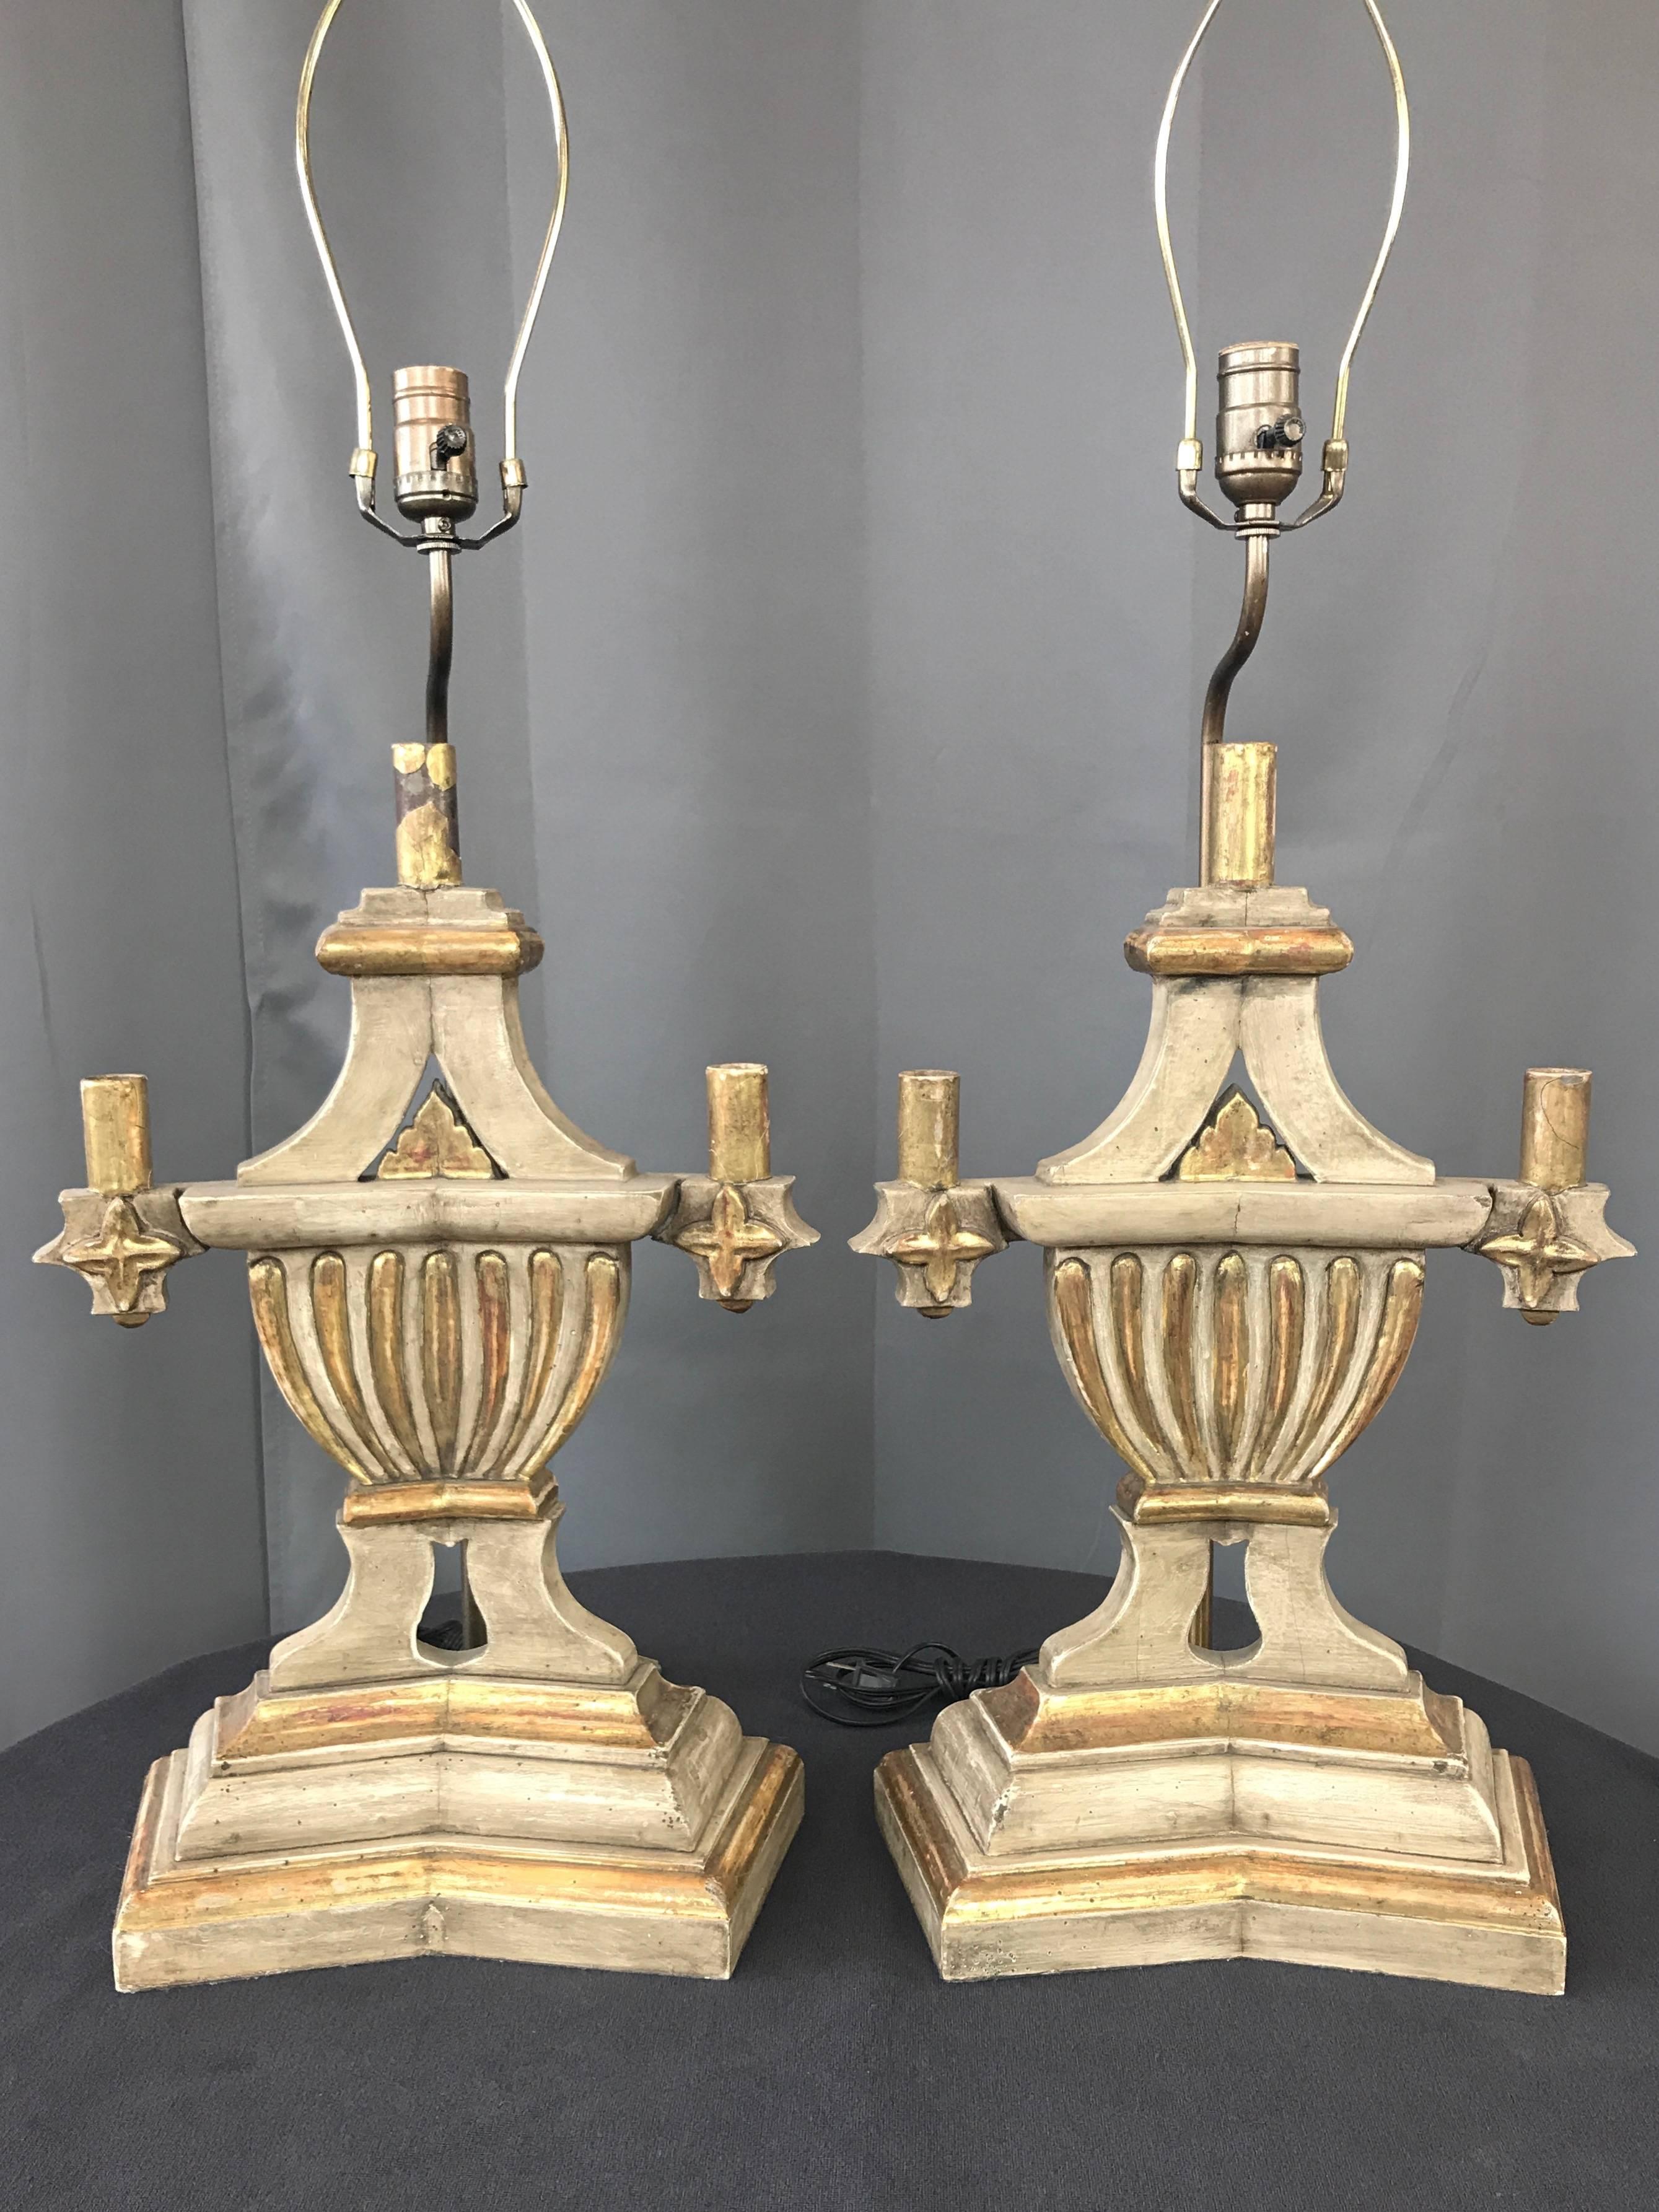 Pair of 1930s Italian Neoclassical Parcel-Gilt Candleholder Table Lamps In Good Condition For Sale In San Francisco, CA